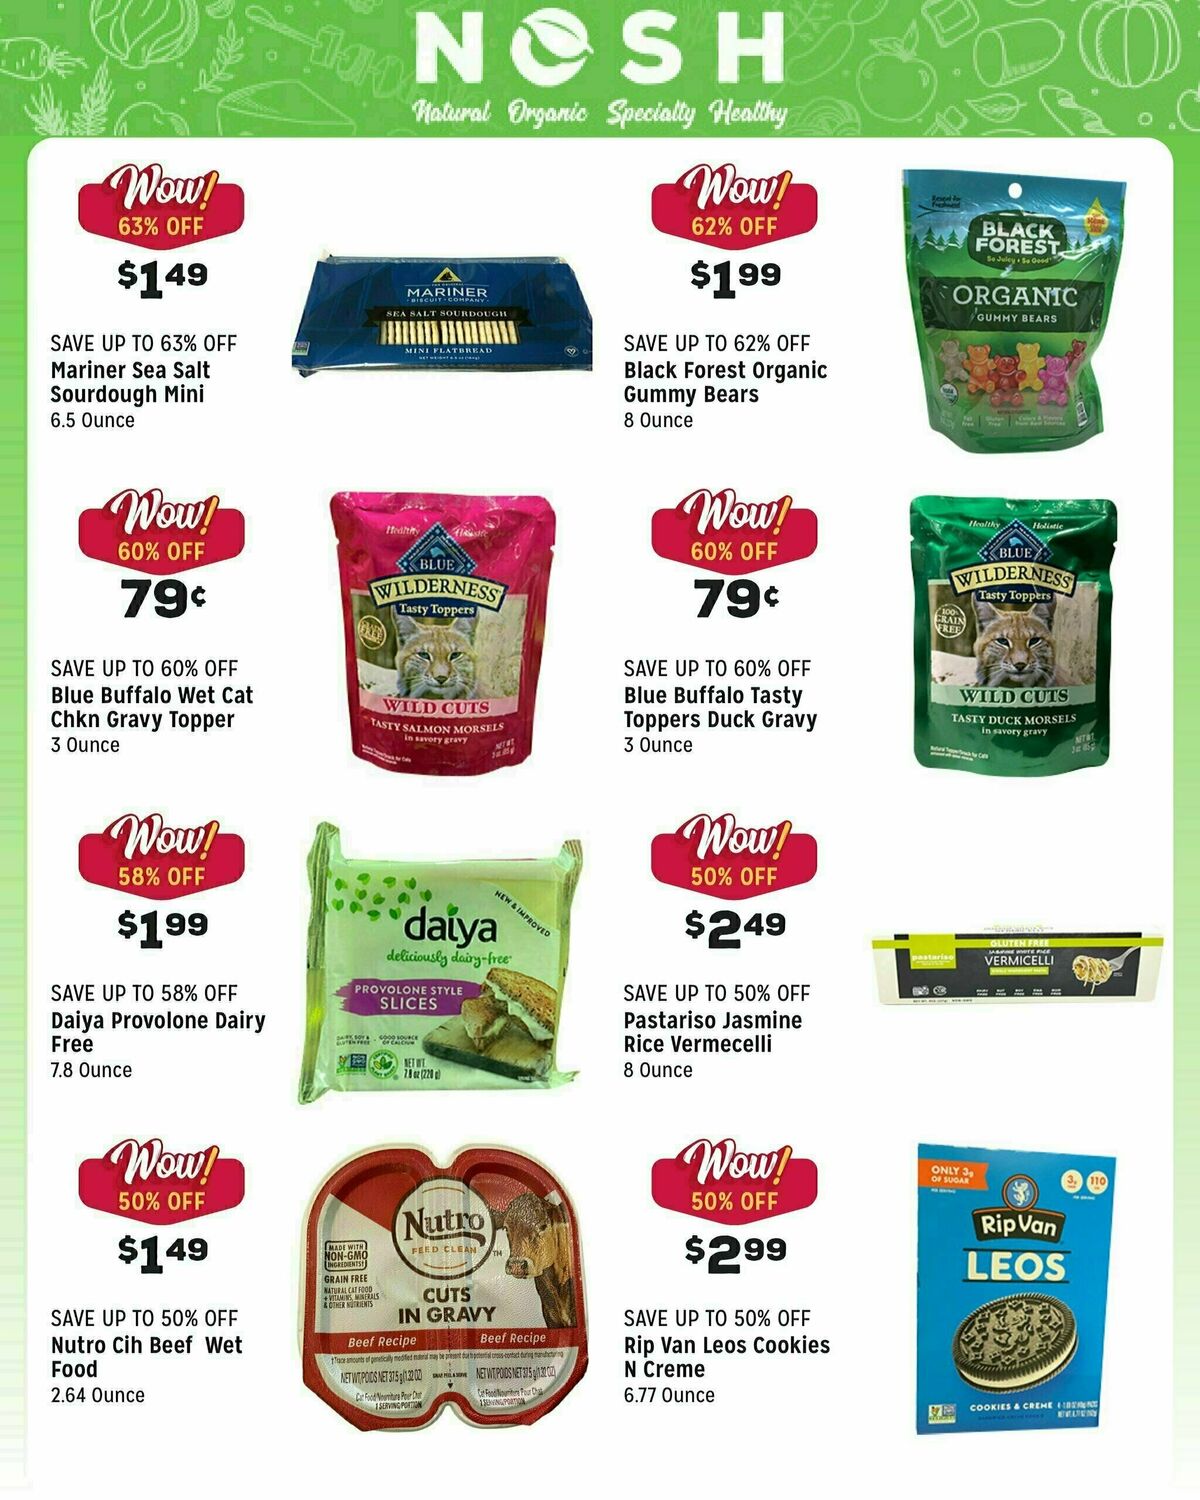 Grocery Outlet Weekly Ad from January 31